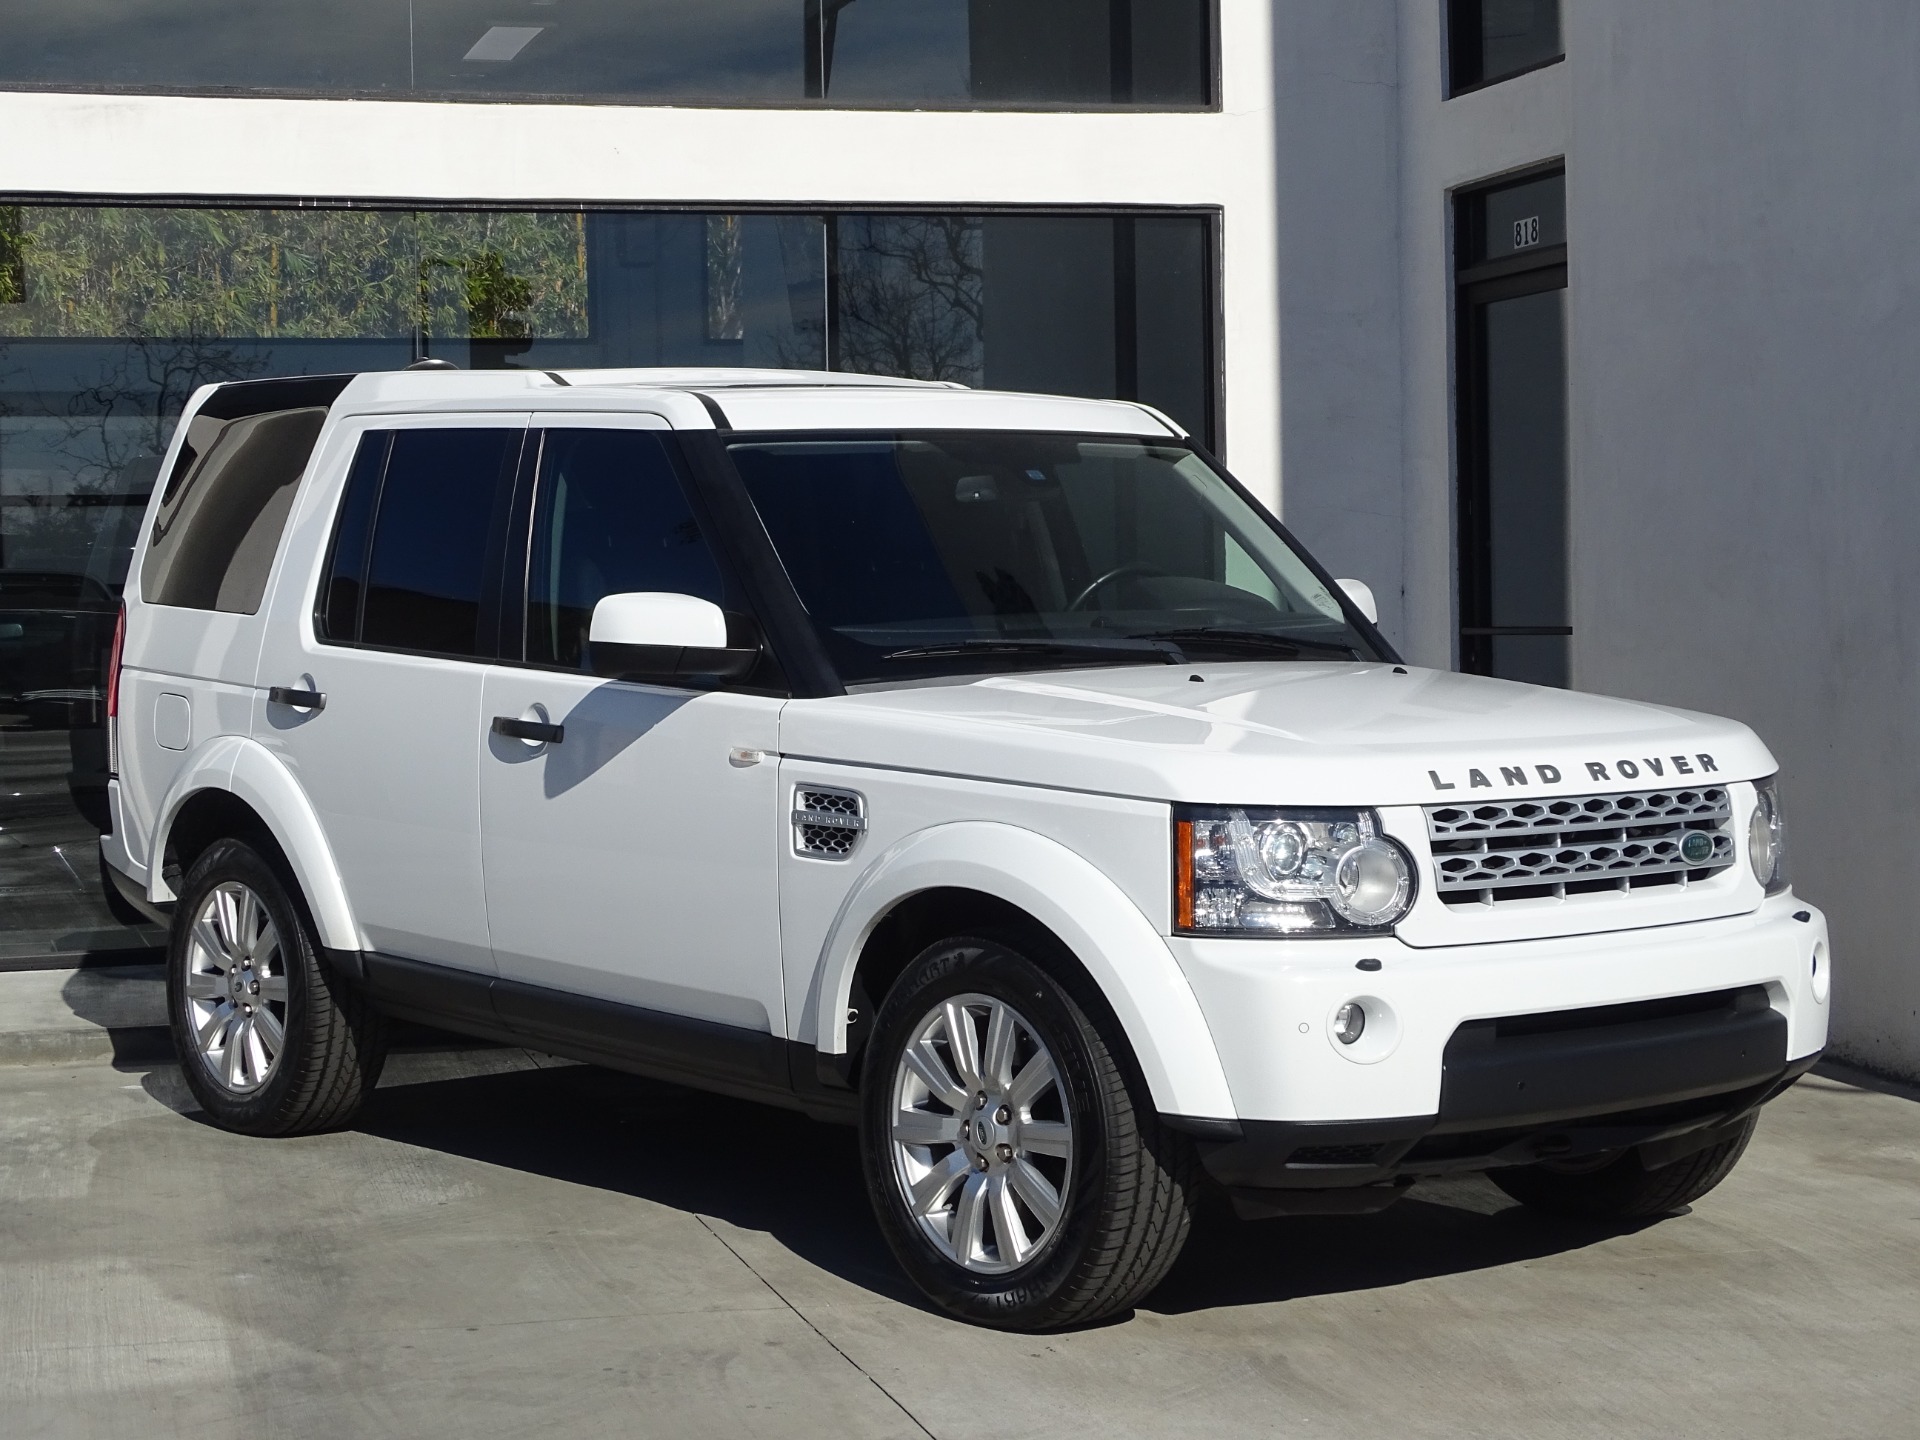 2012 Land Rover LR4 HSE LUX Stock # 6368 for sale near Redondo Beach